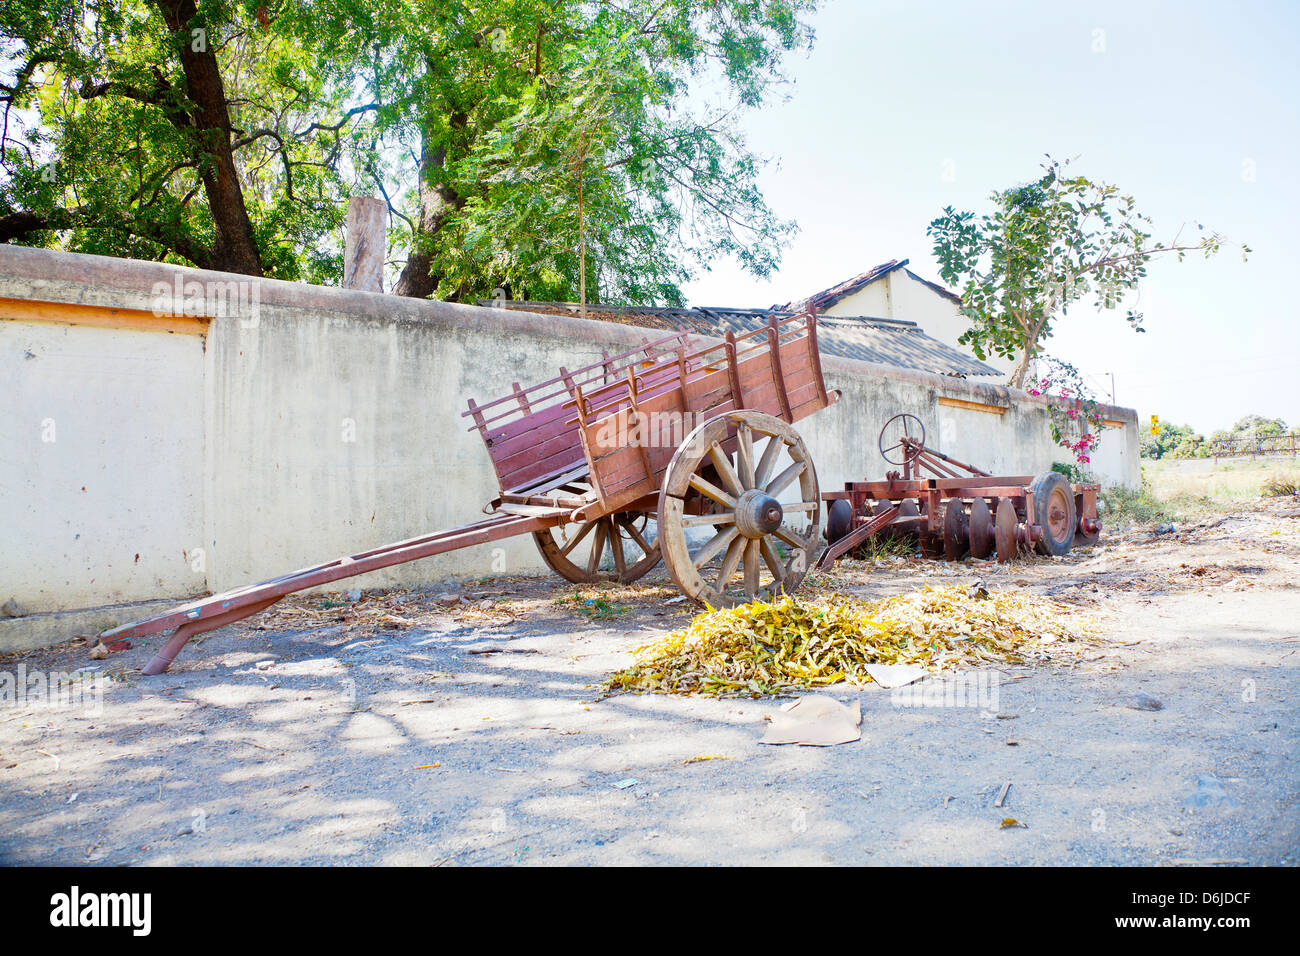 Outskirts of an Indian hinterlands village of a wall lined with farm machinery and parked bullock cart under the shade of trees Stock Photo